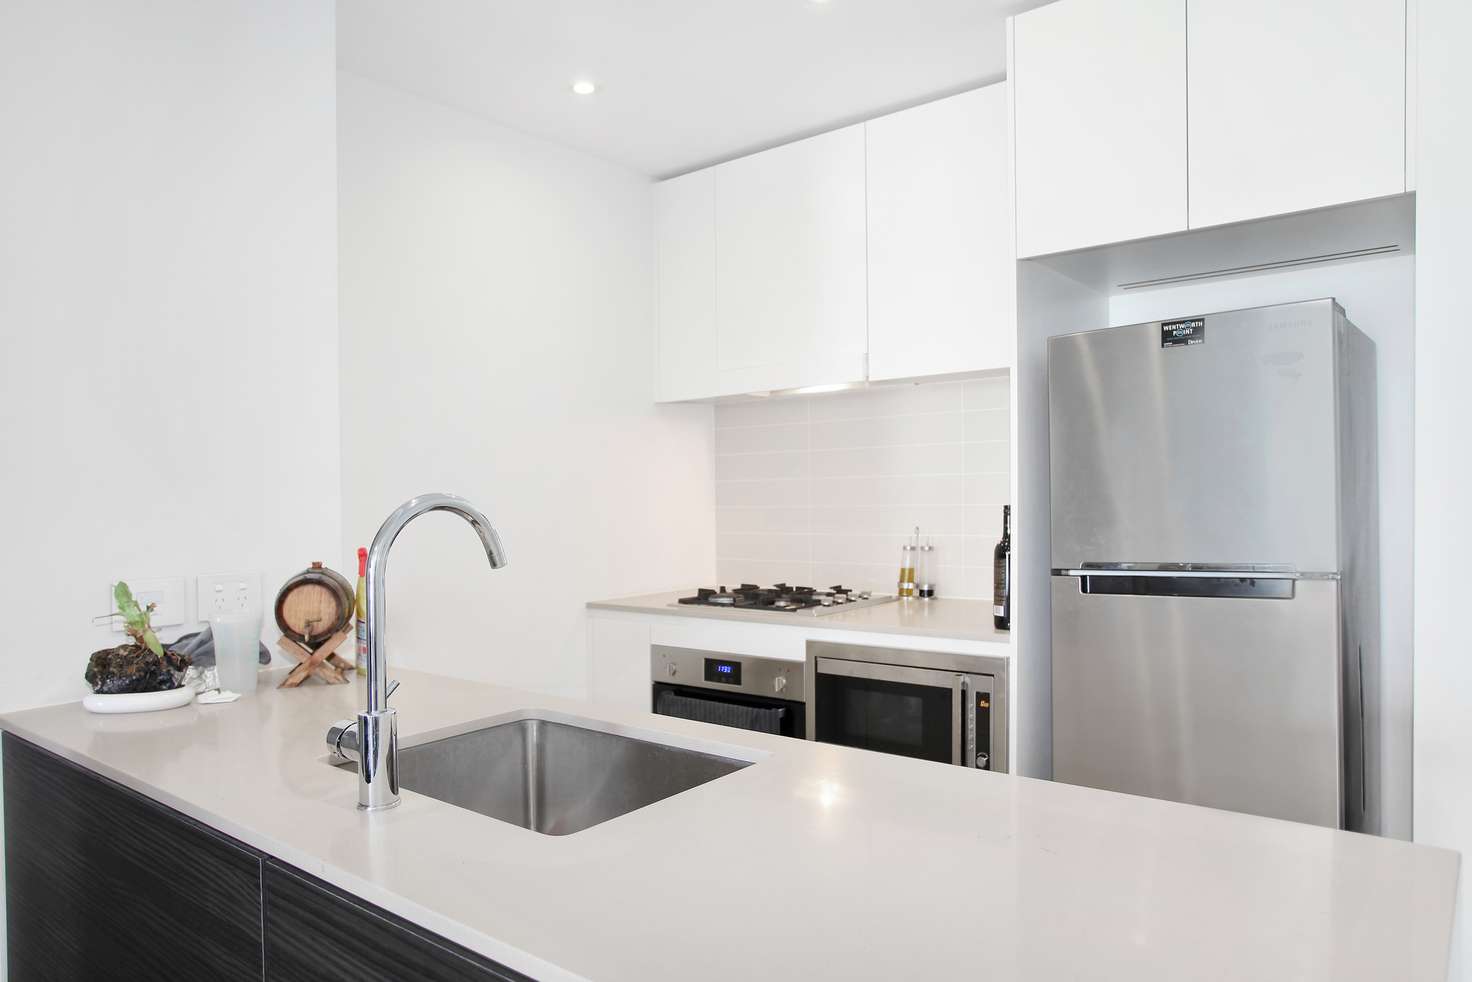 Main view of Homely apartment listing, 412/48 Amalfi Drive, Wentworth Point NSW 2127